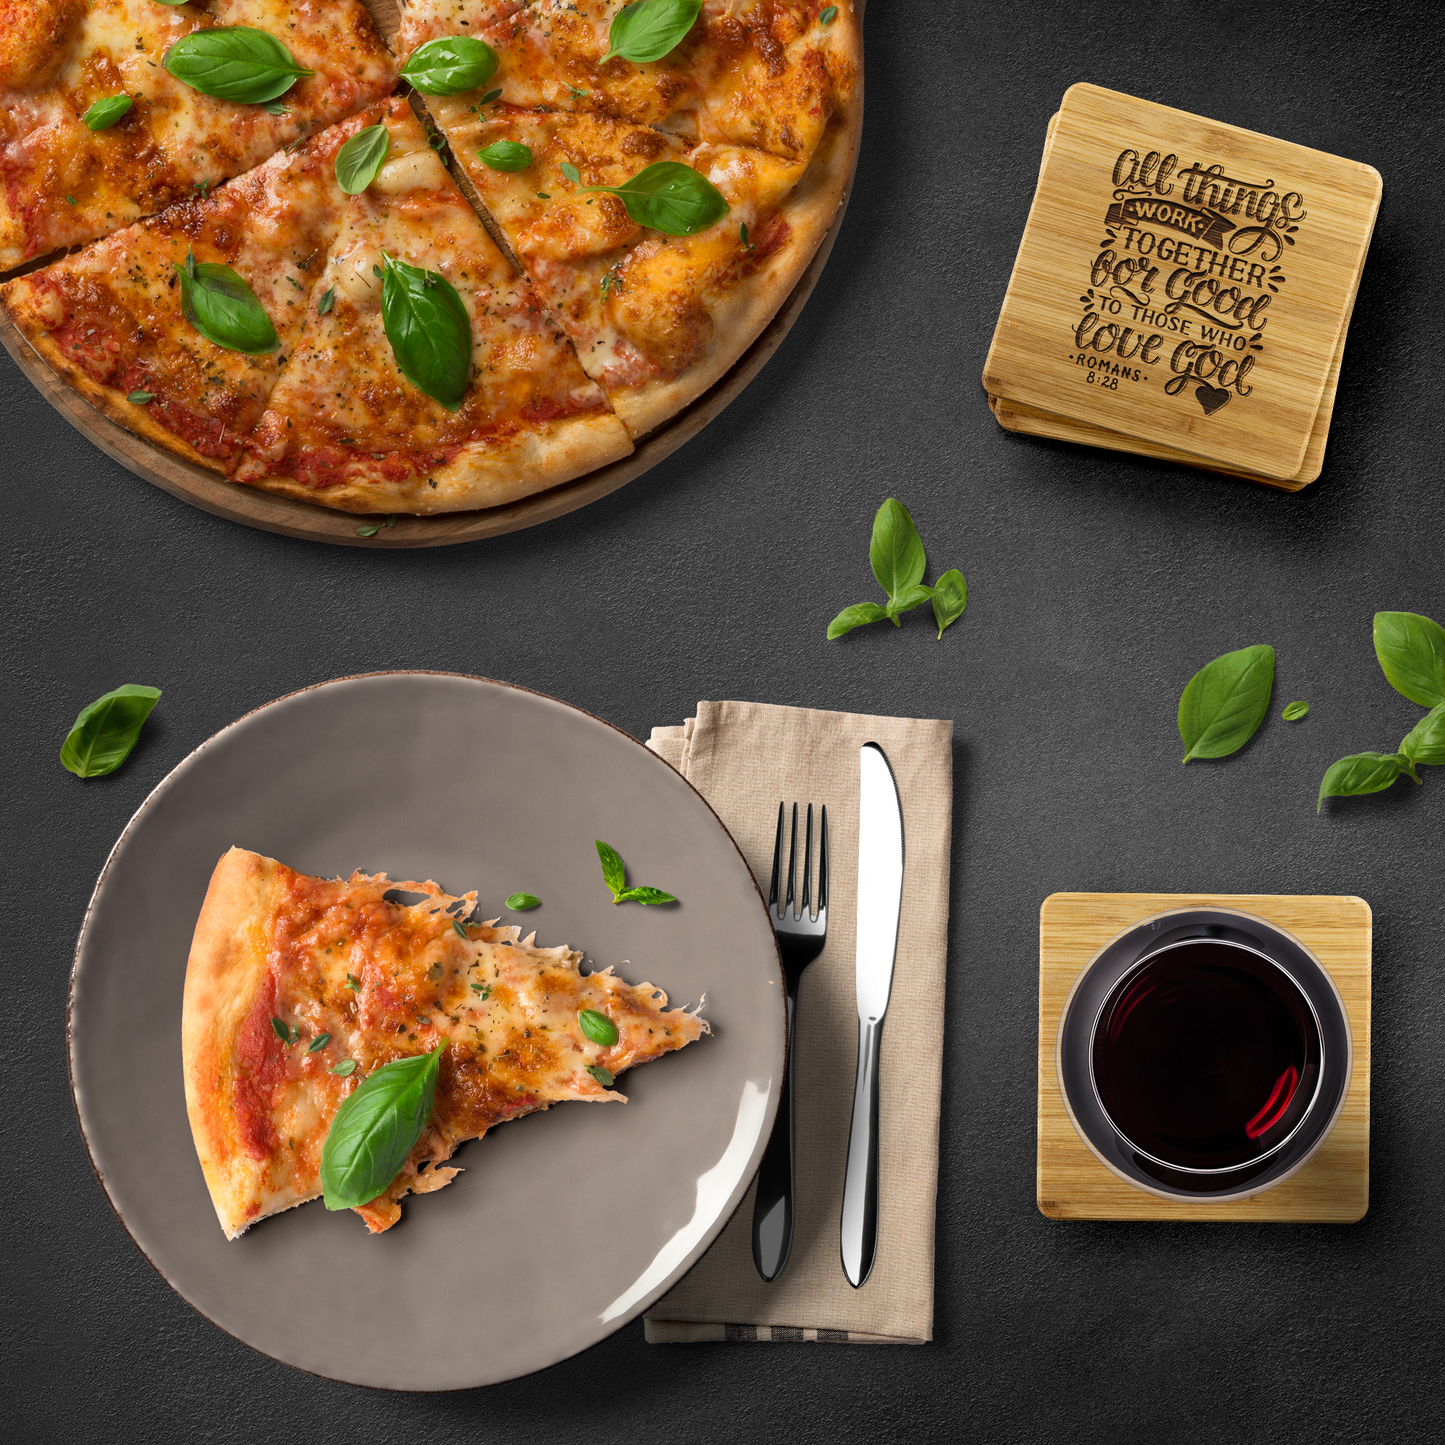 All Things Work Together For Good To Those Who Love God - Bamboo Coasters with pizza